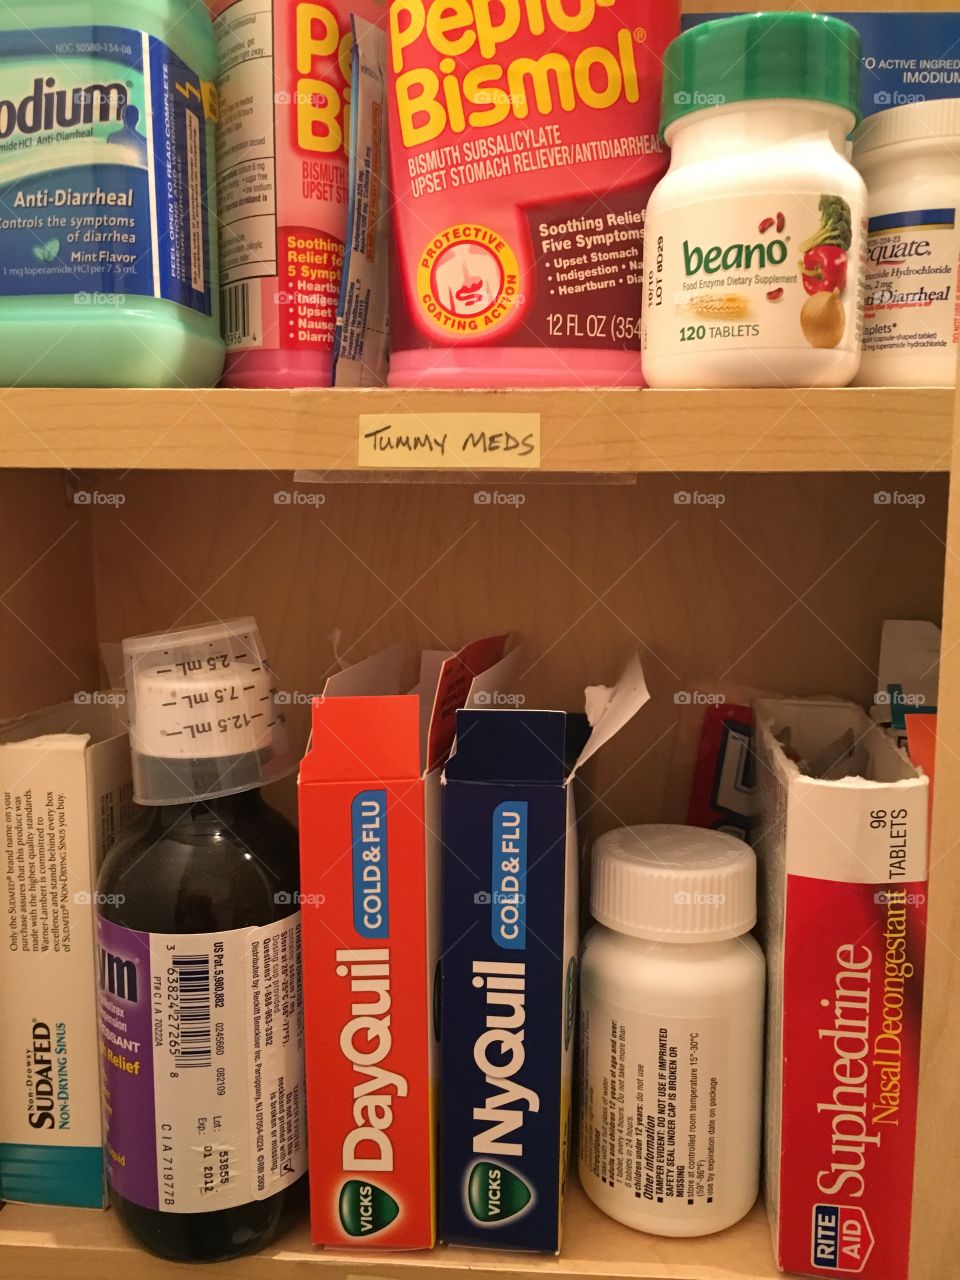 Inside of a medicine cabinet at my house! Well stocked for any illnesses.